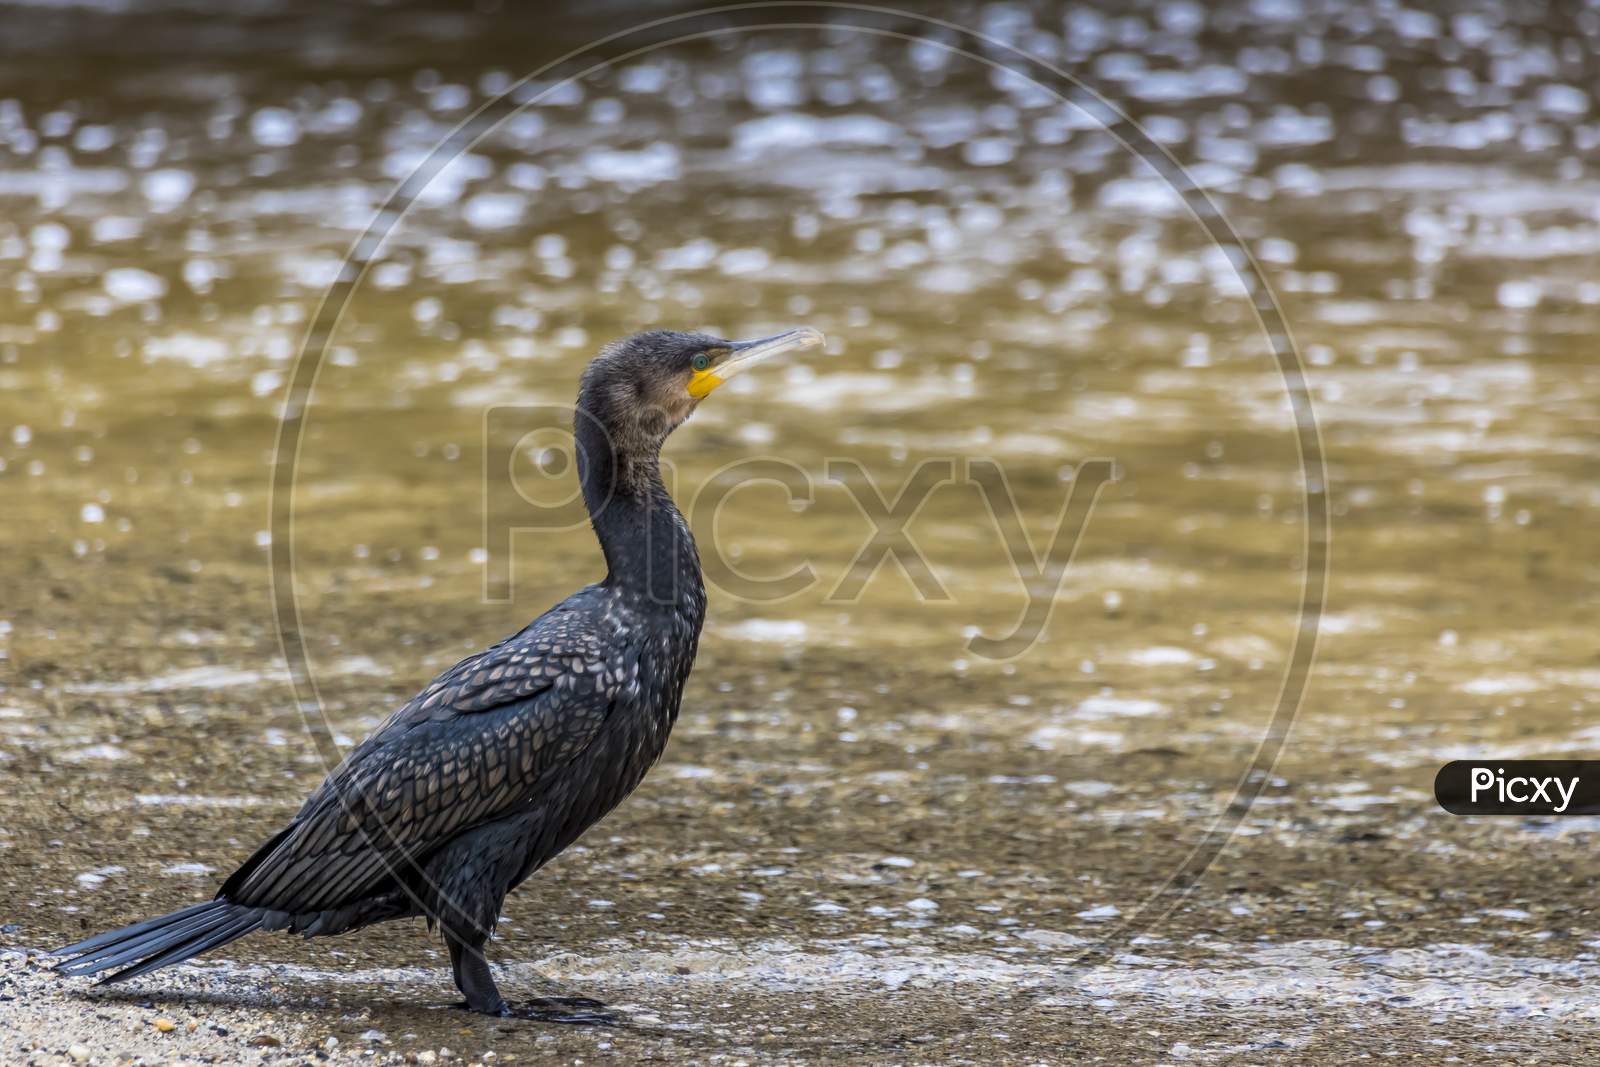 Cormorant at a beach in Victoria, Australia at a rainy day in summer.